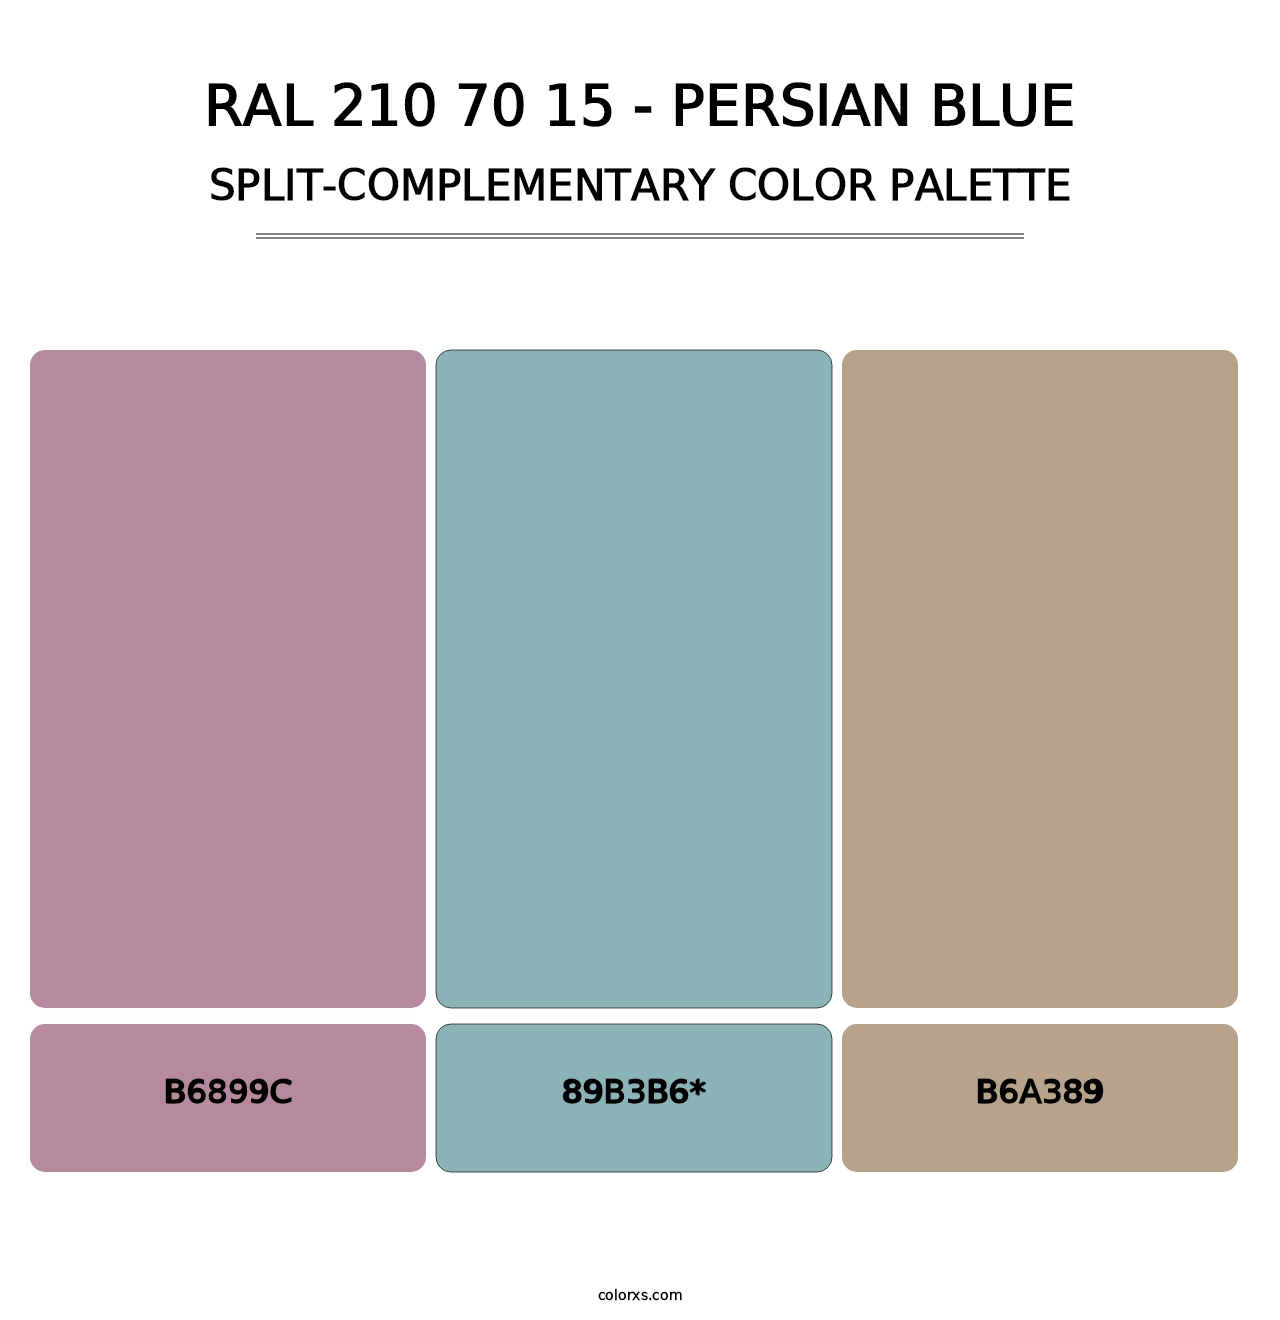 RAL 210 70 15 - Persian Blue - Split-Complementary Color Palette